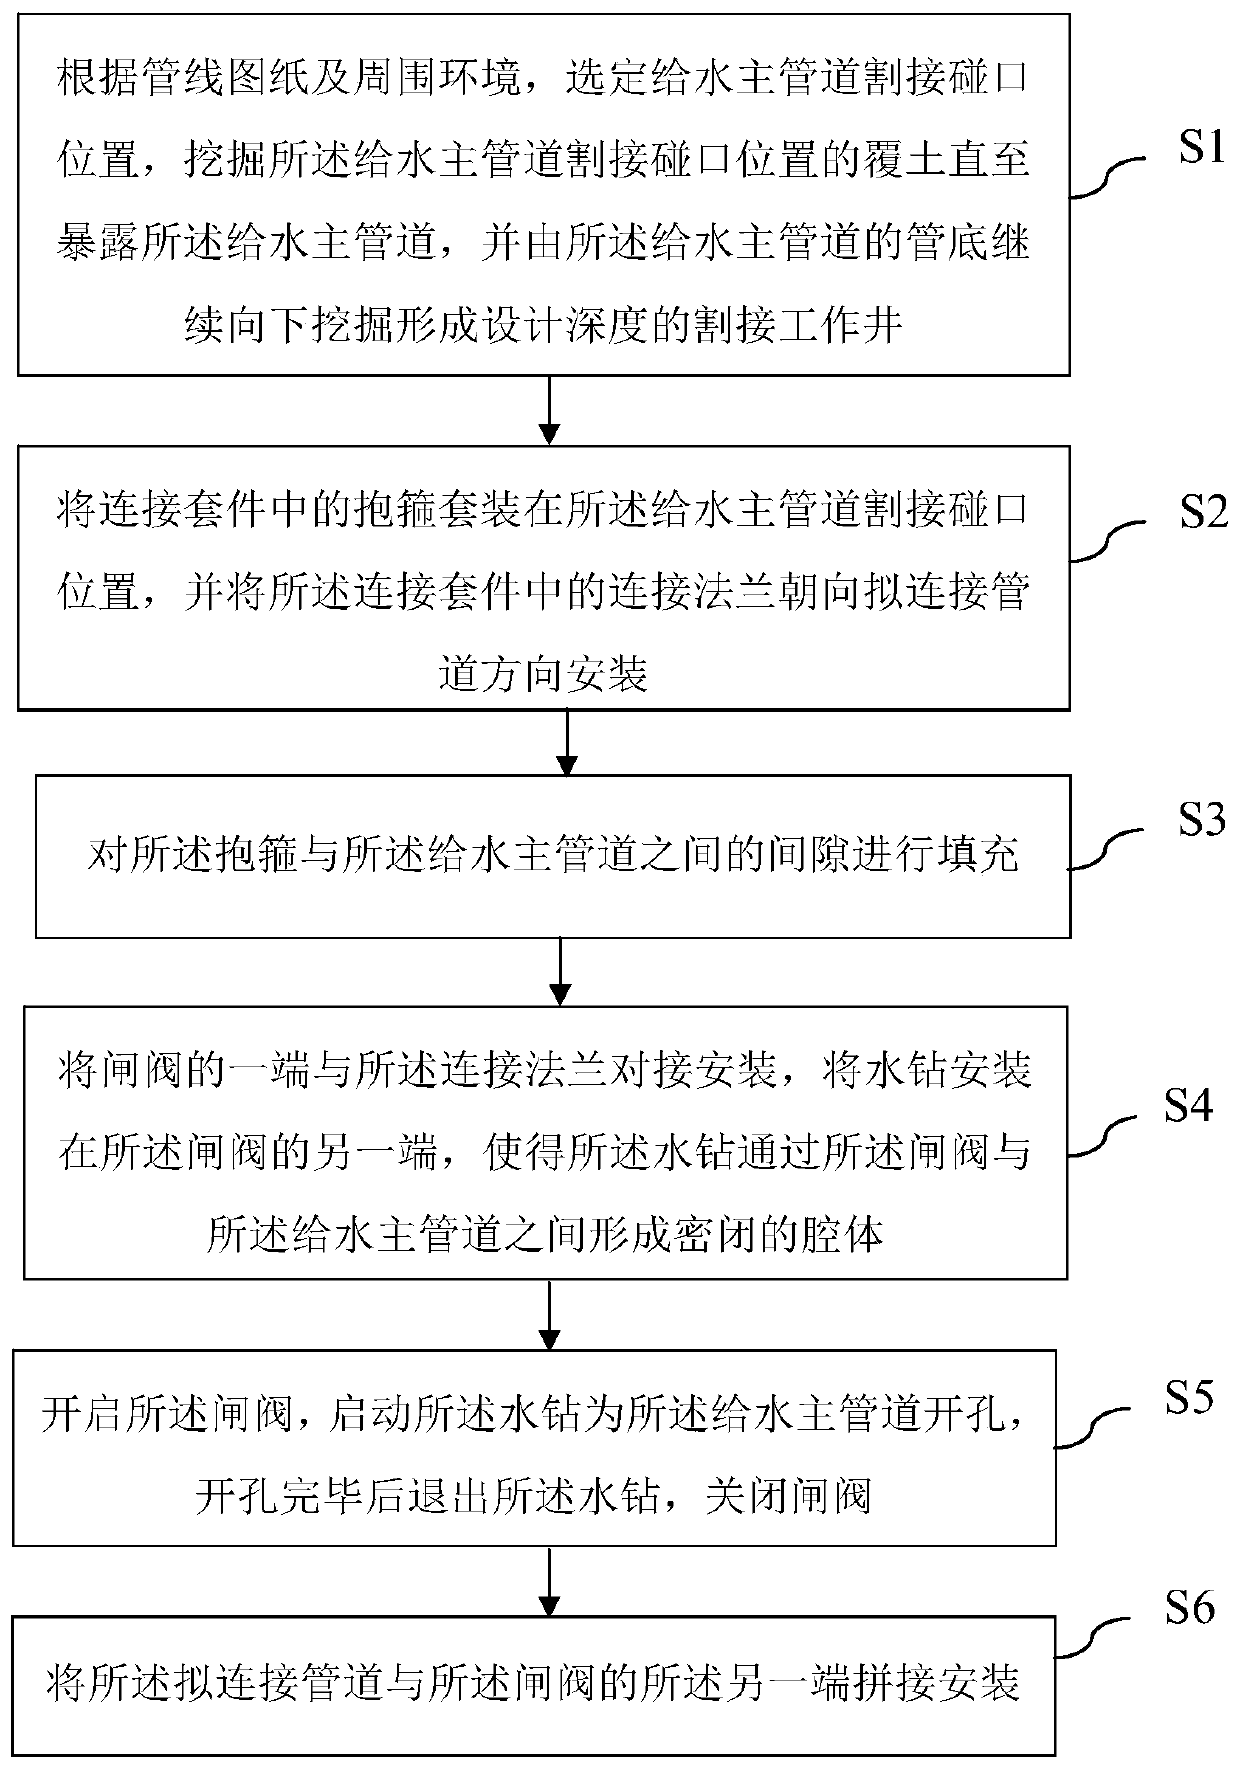 Under-pressure cutting and splicing construction method for water supply pipelines of different materials